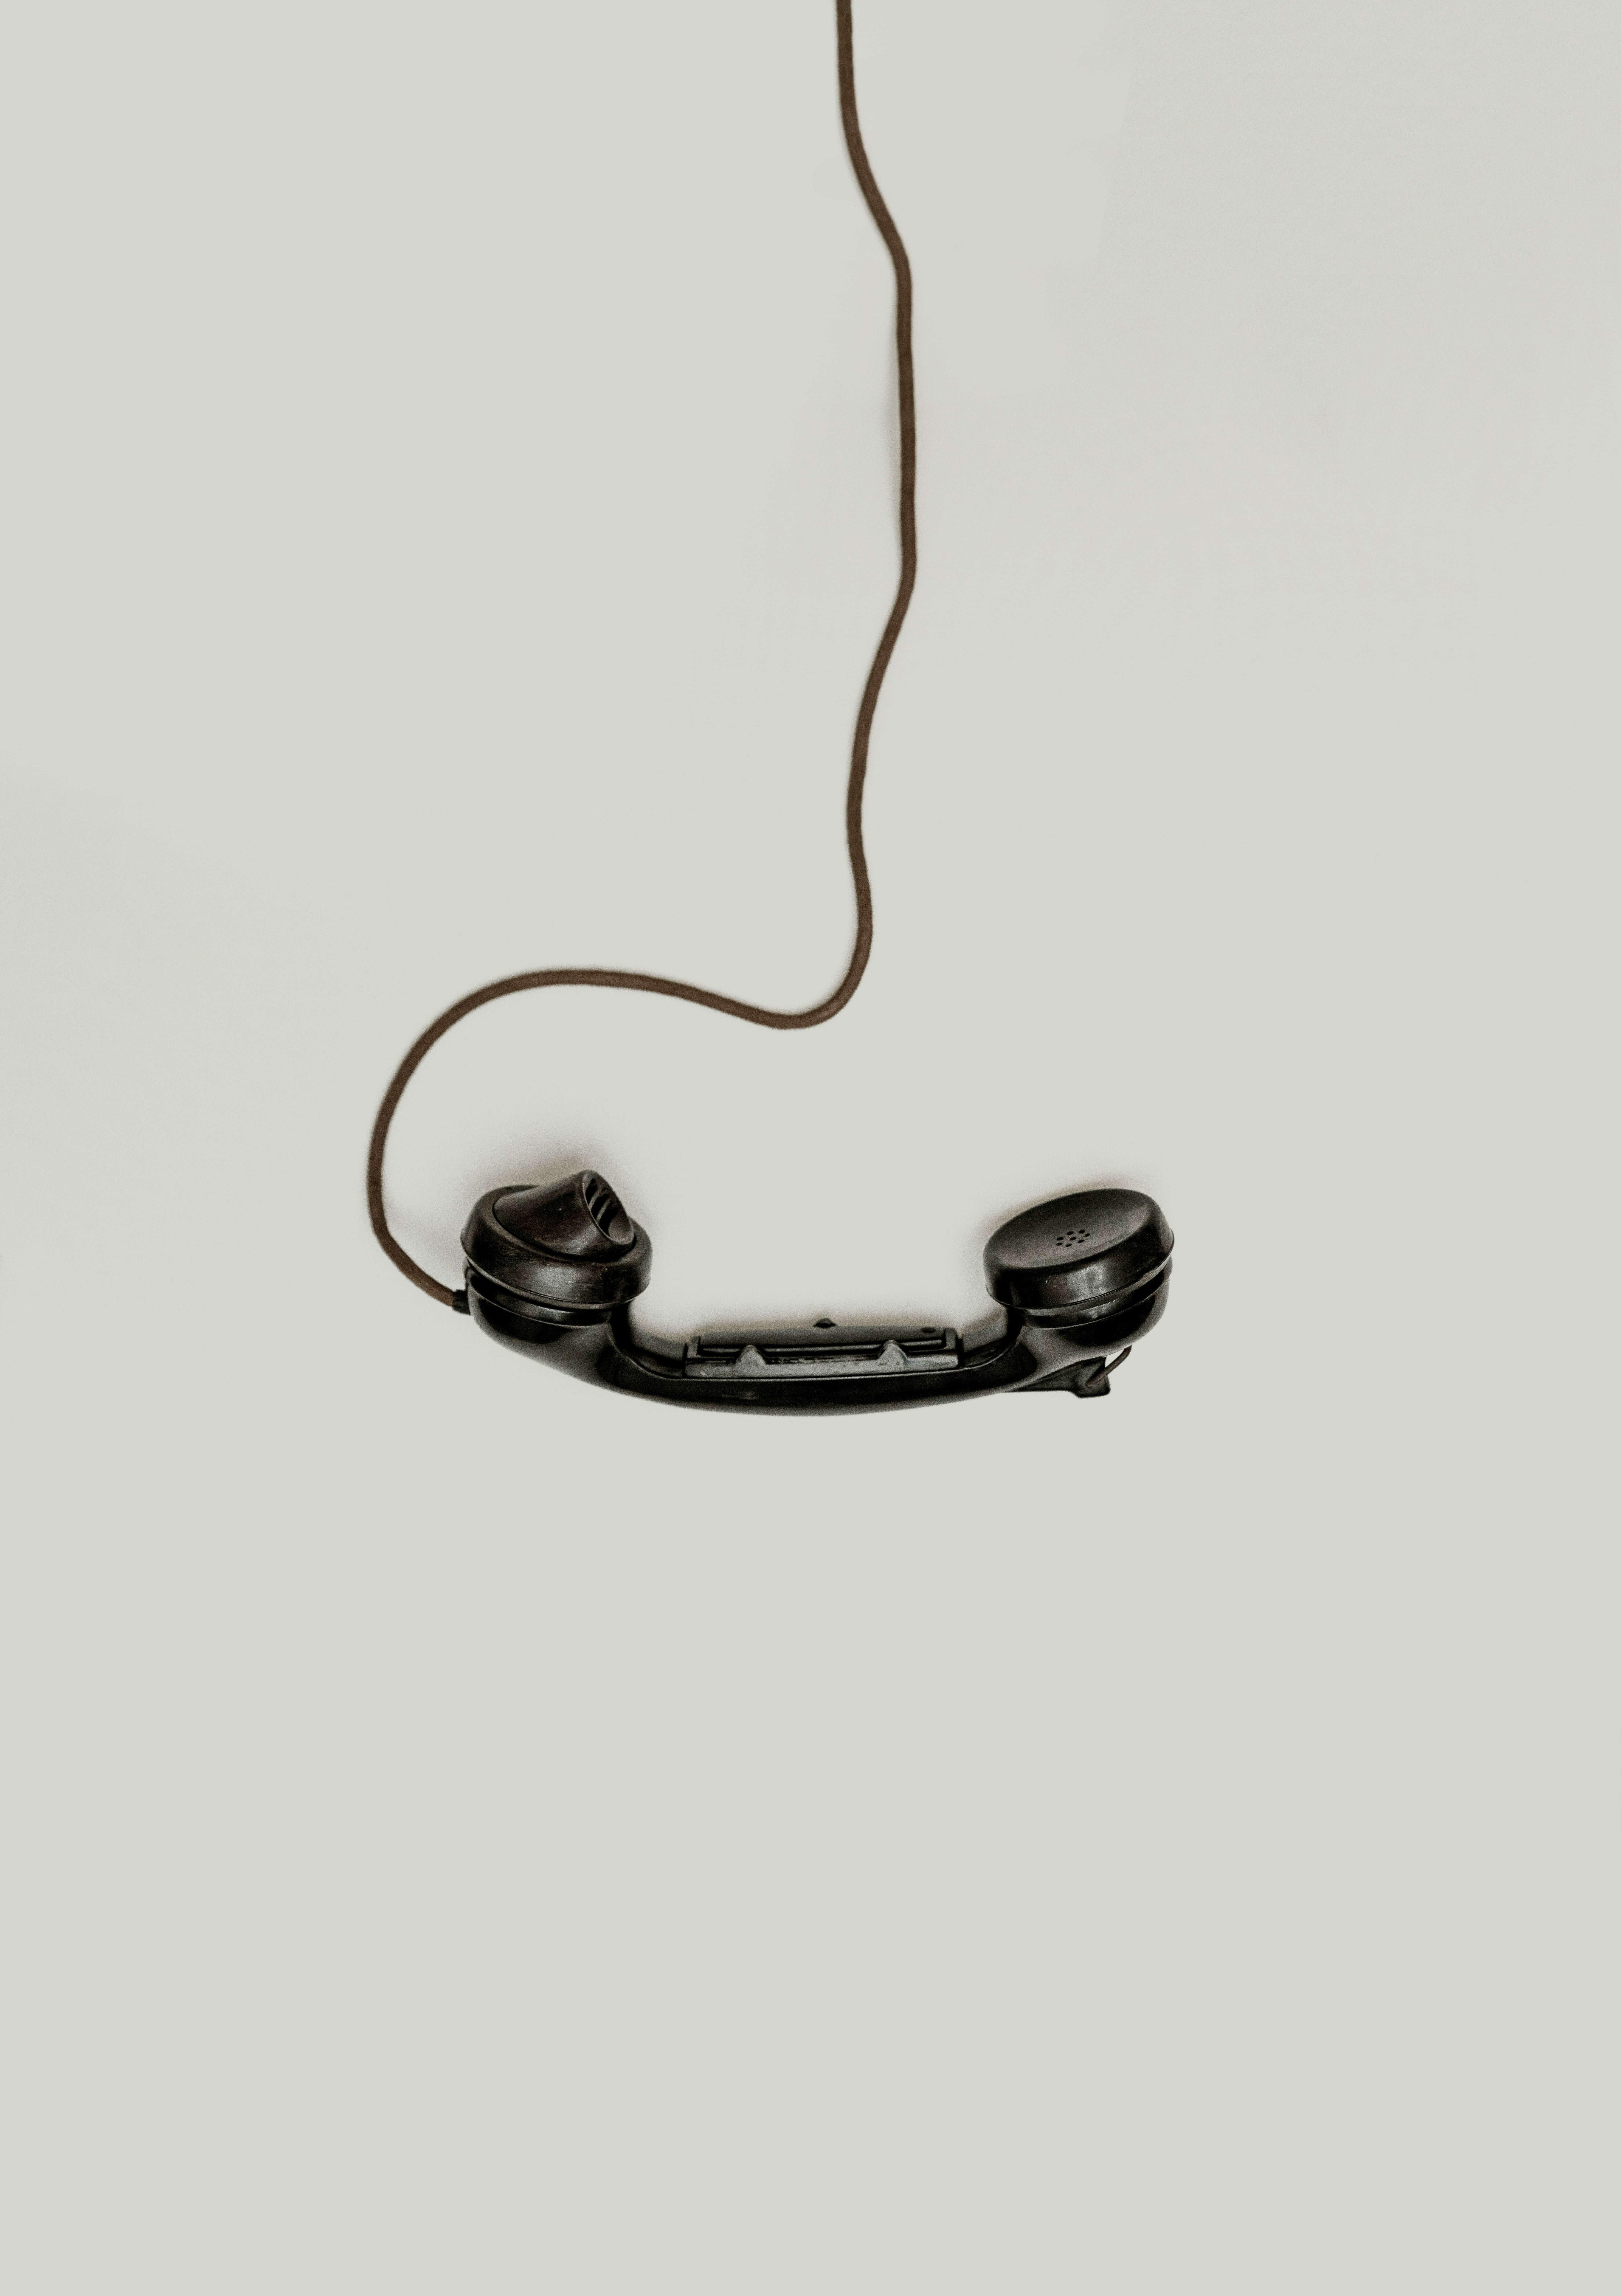 phone on a cord